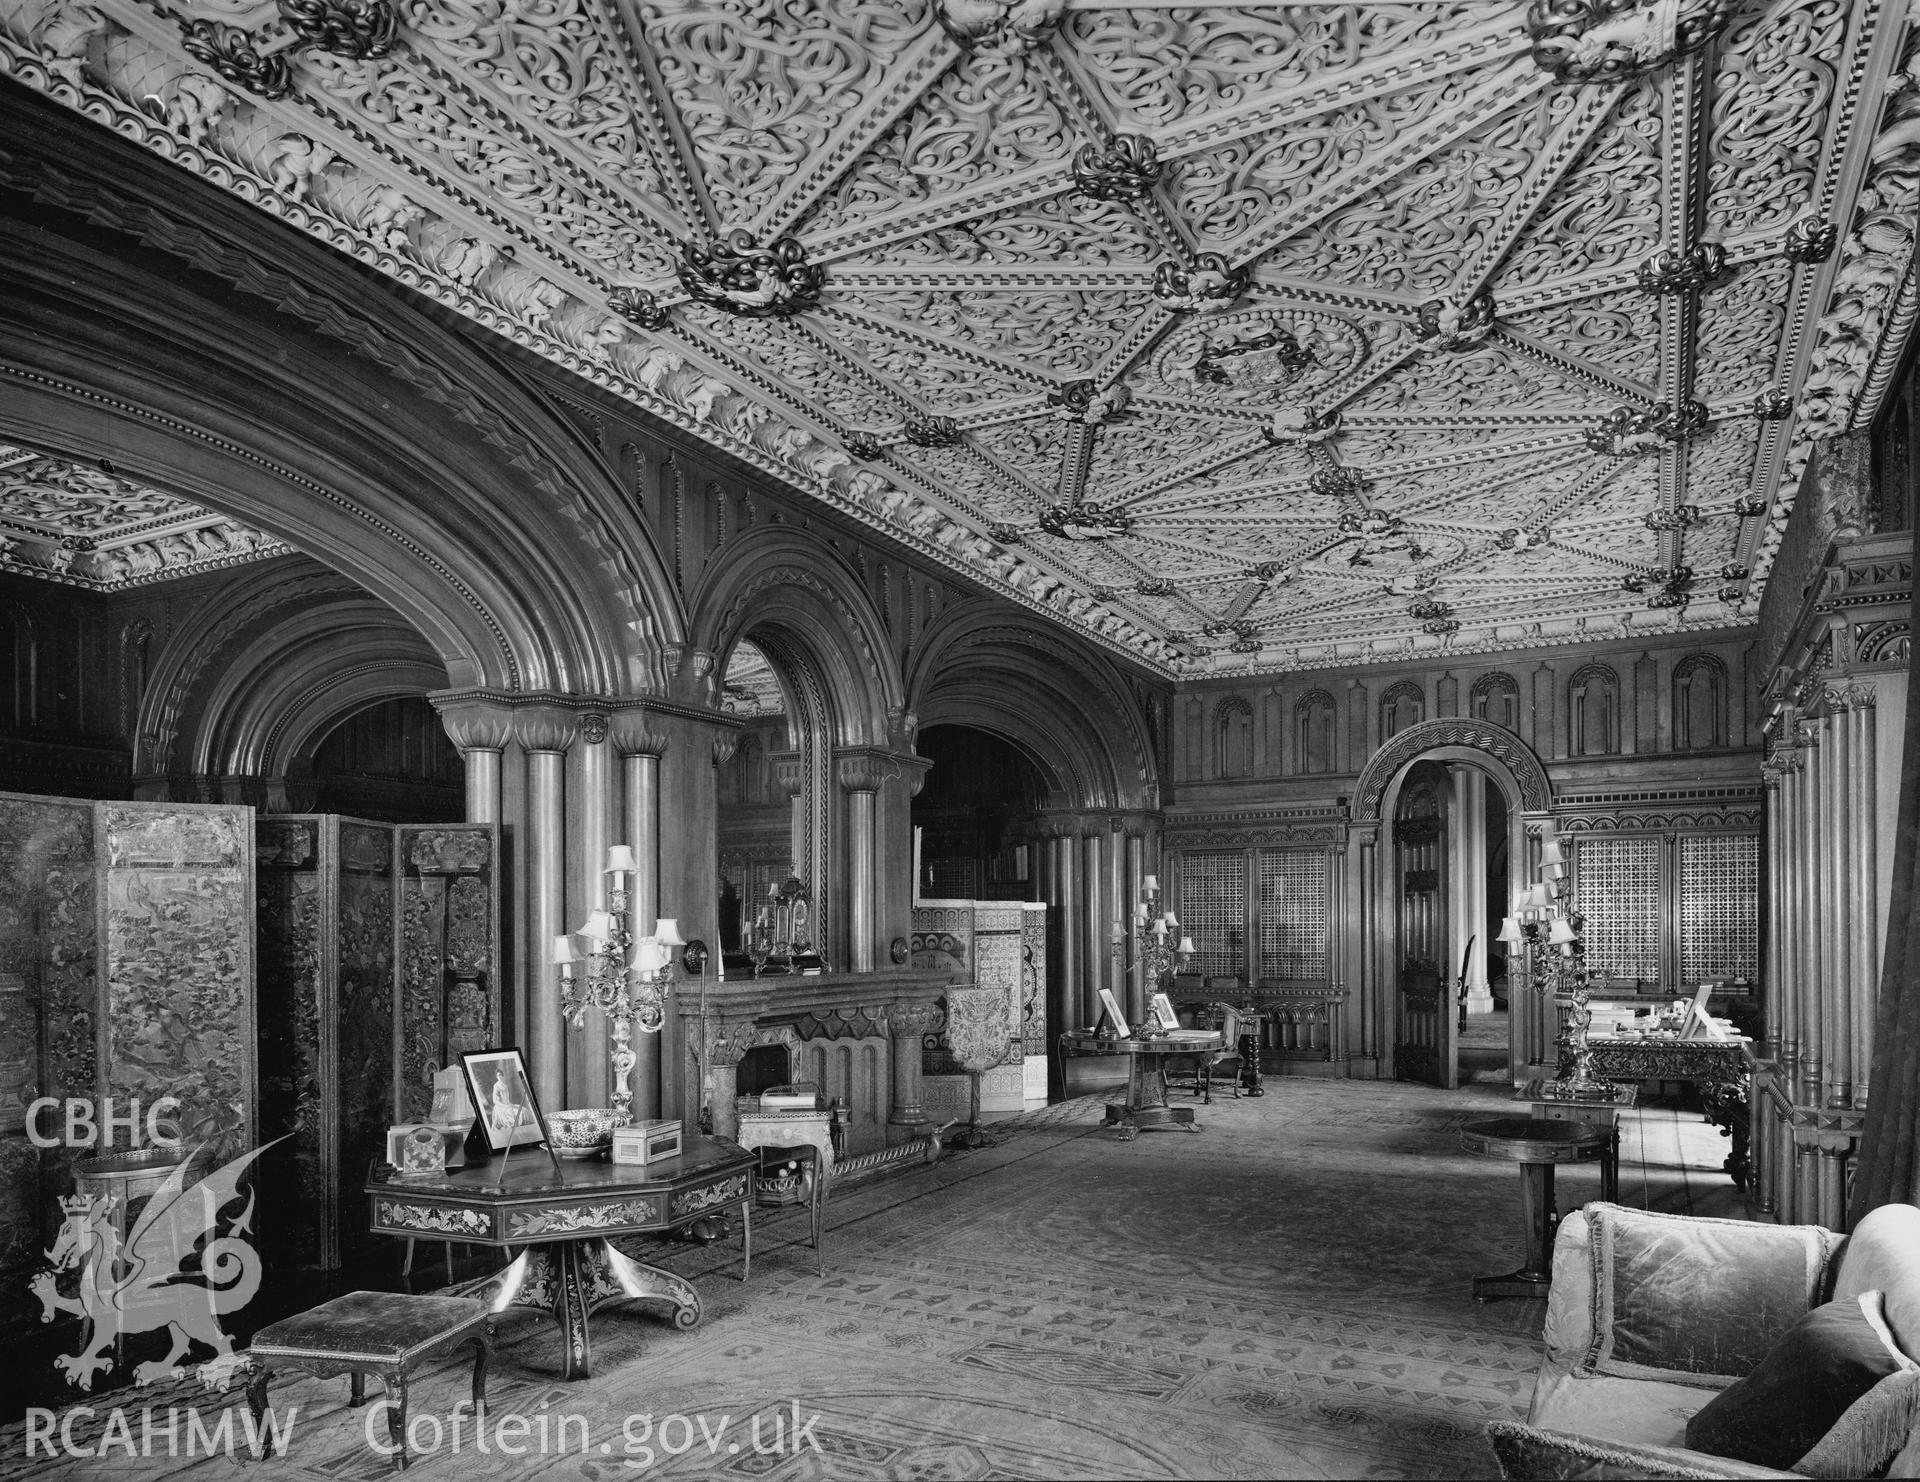 Digital copy of a 1954 photo by A.F. Kersting showing the library at Penrhyn Castle.